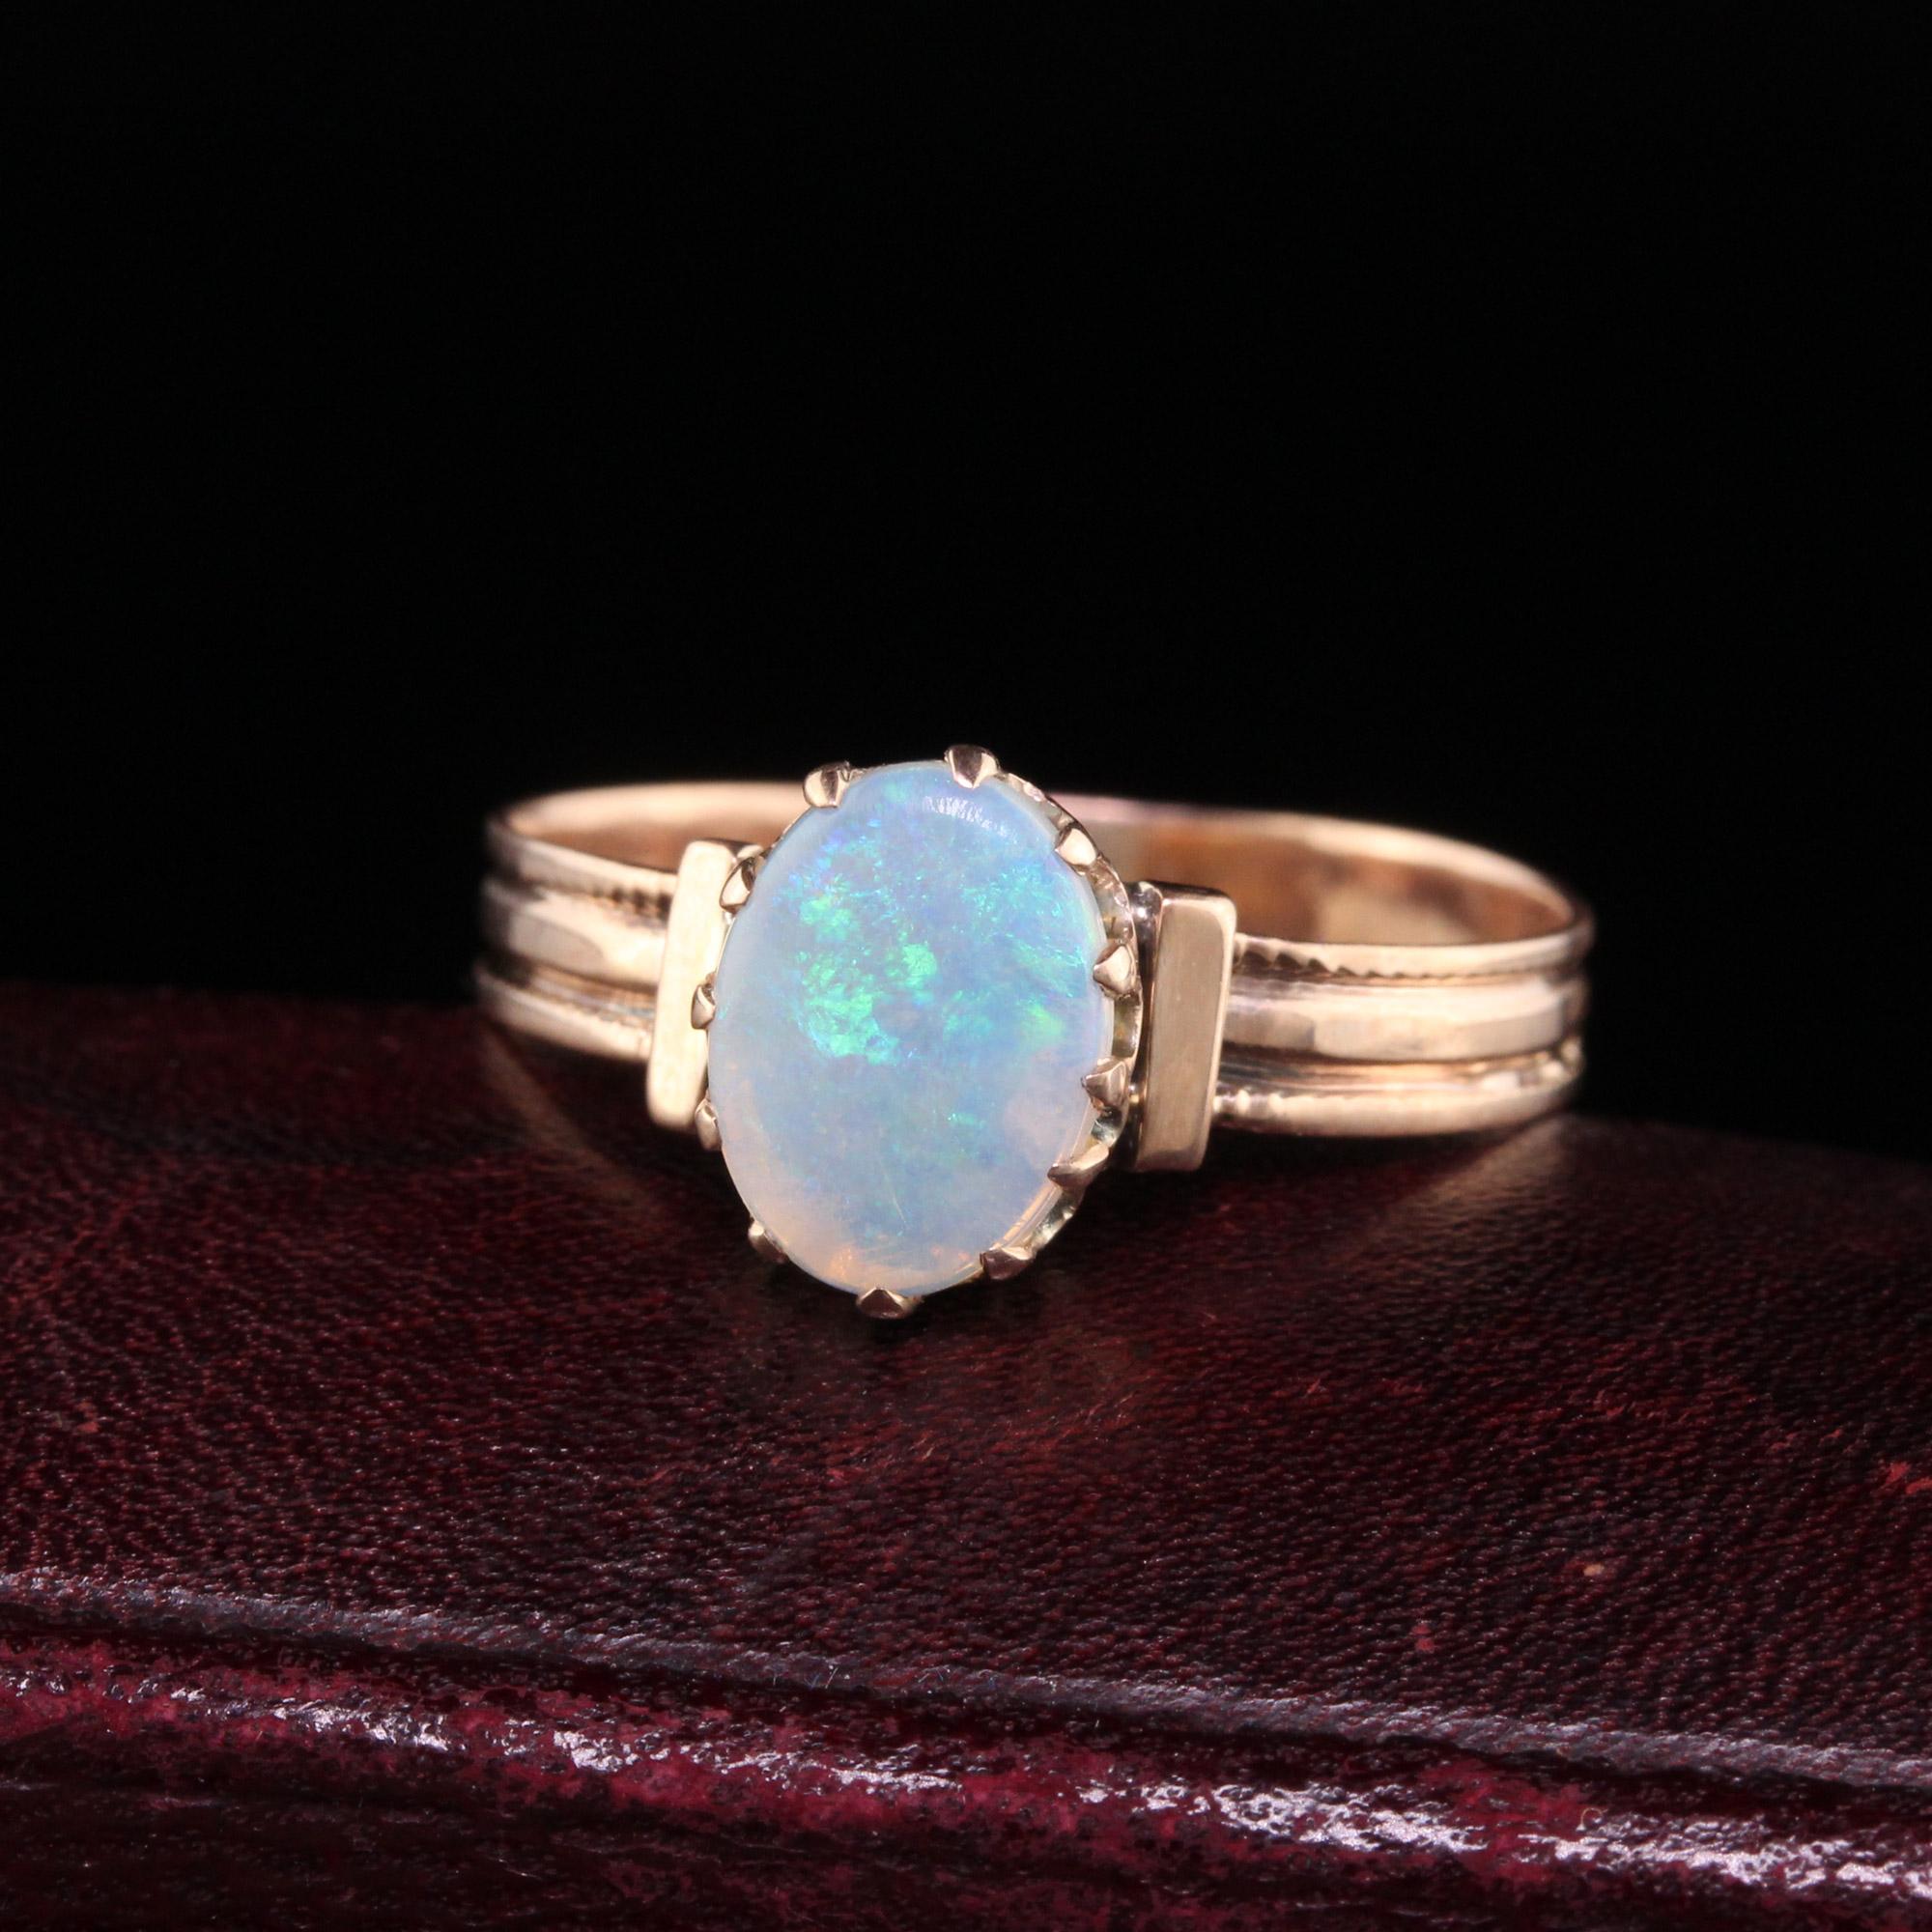 Beautiful Antique Victorian 14K Rose Gold Natural Opal Engagement Ring. This gorgeous ring is crafted in 14k rose gold. The center holds a natural opal that is translucent and shows play of color. The ring is in good condition and sits low on the